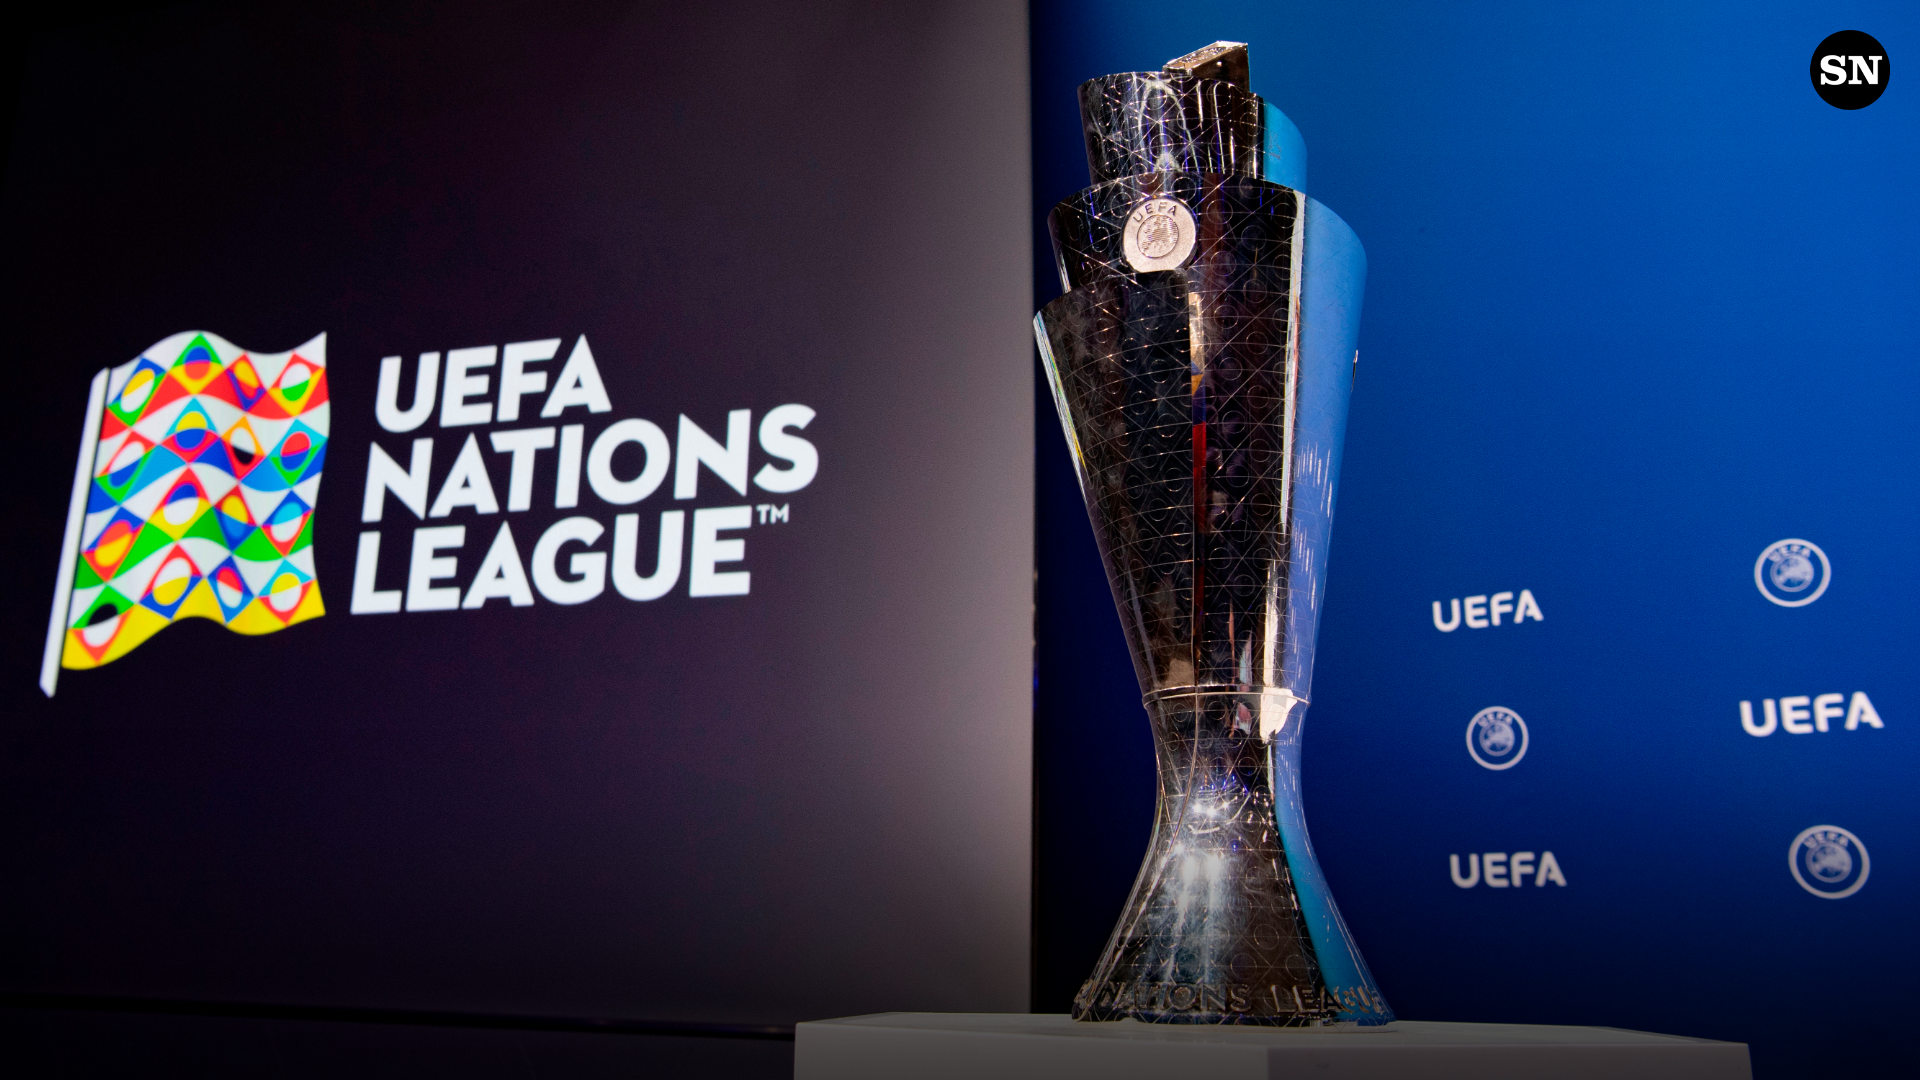 UEFA announces that the Netherlands will host the Nations League Final Four